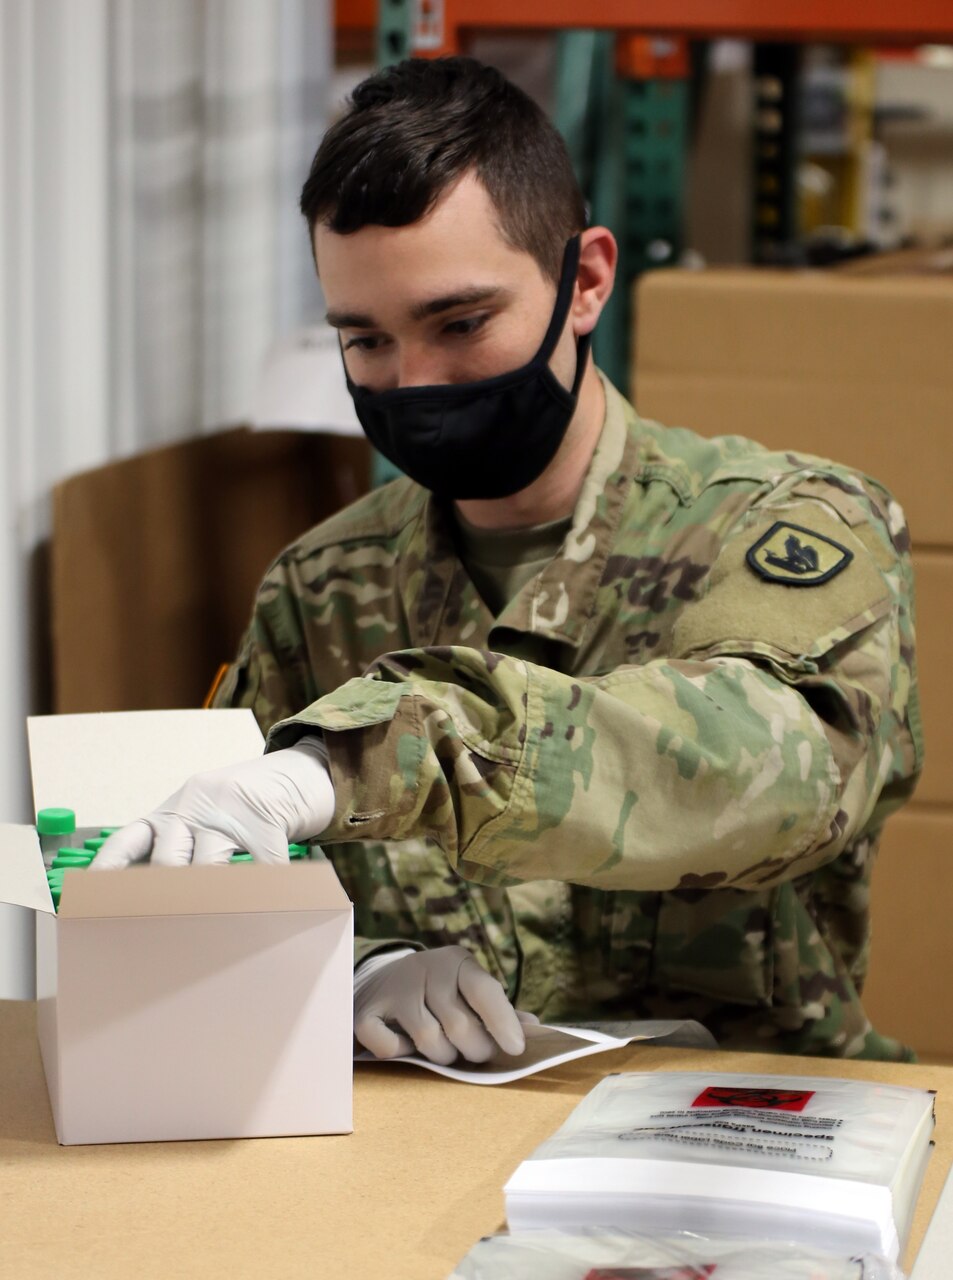 A soldier wearing a face mask reaches into a box of vials while assembling COVID-19 test kits.